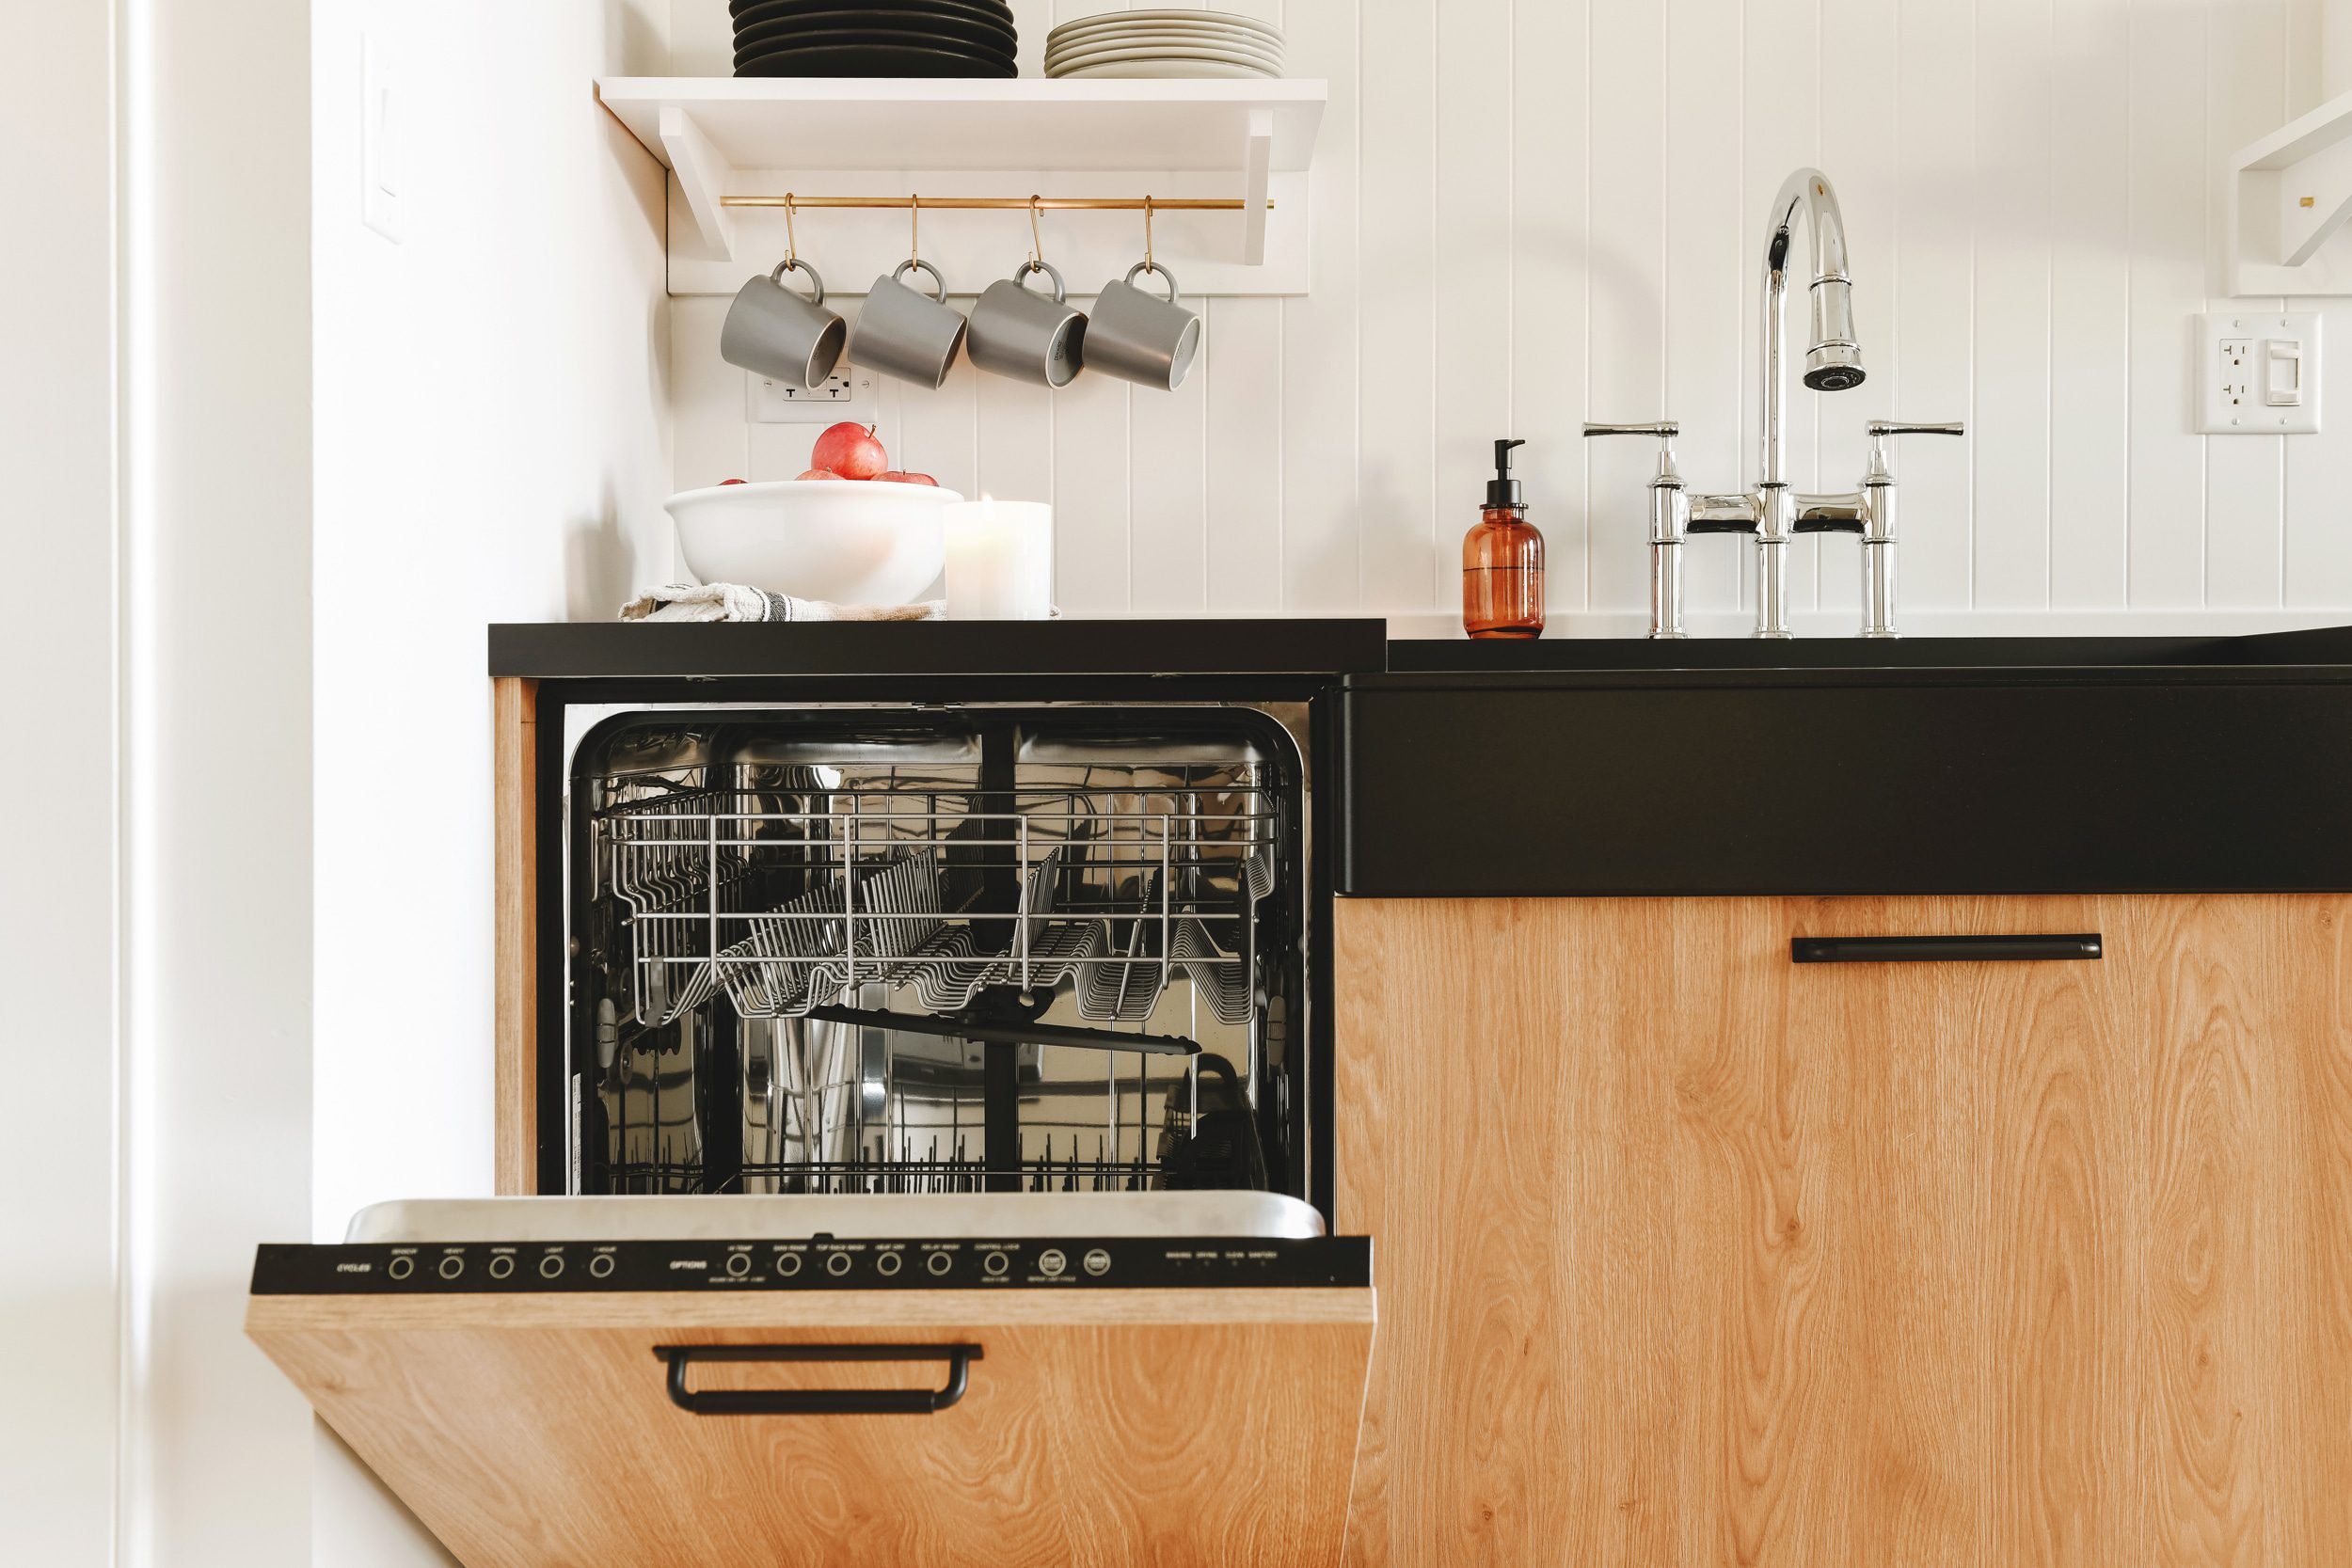 Concealed dishwasher in a compact kitchen | via Yellow Brick Home